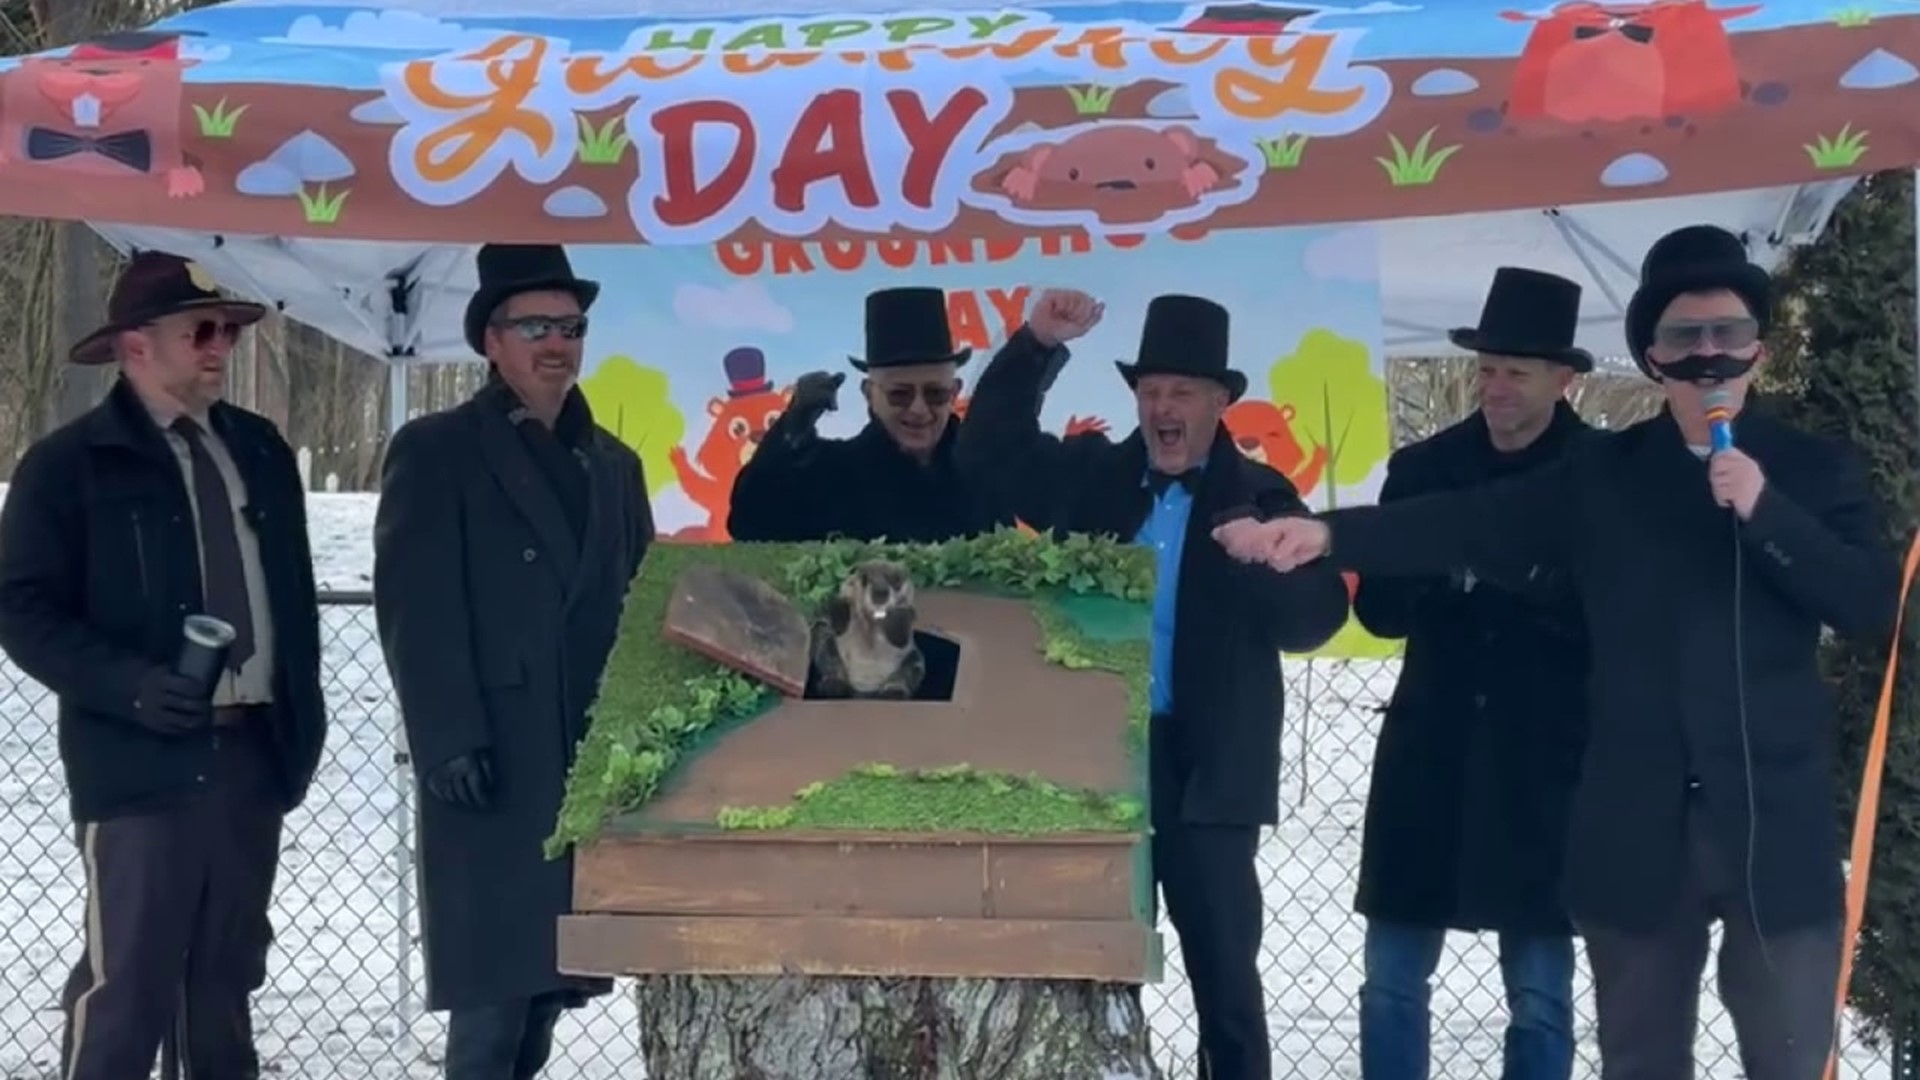 As Groundhog Day approaches, Punxsutawney Phil might have some competition in northeastern Pennsylvania.